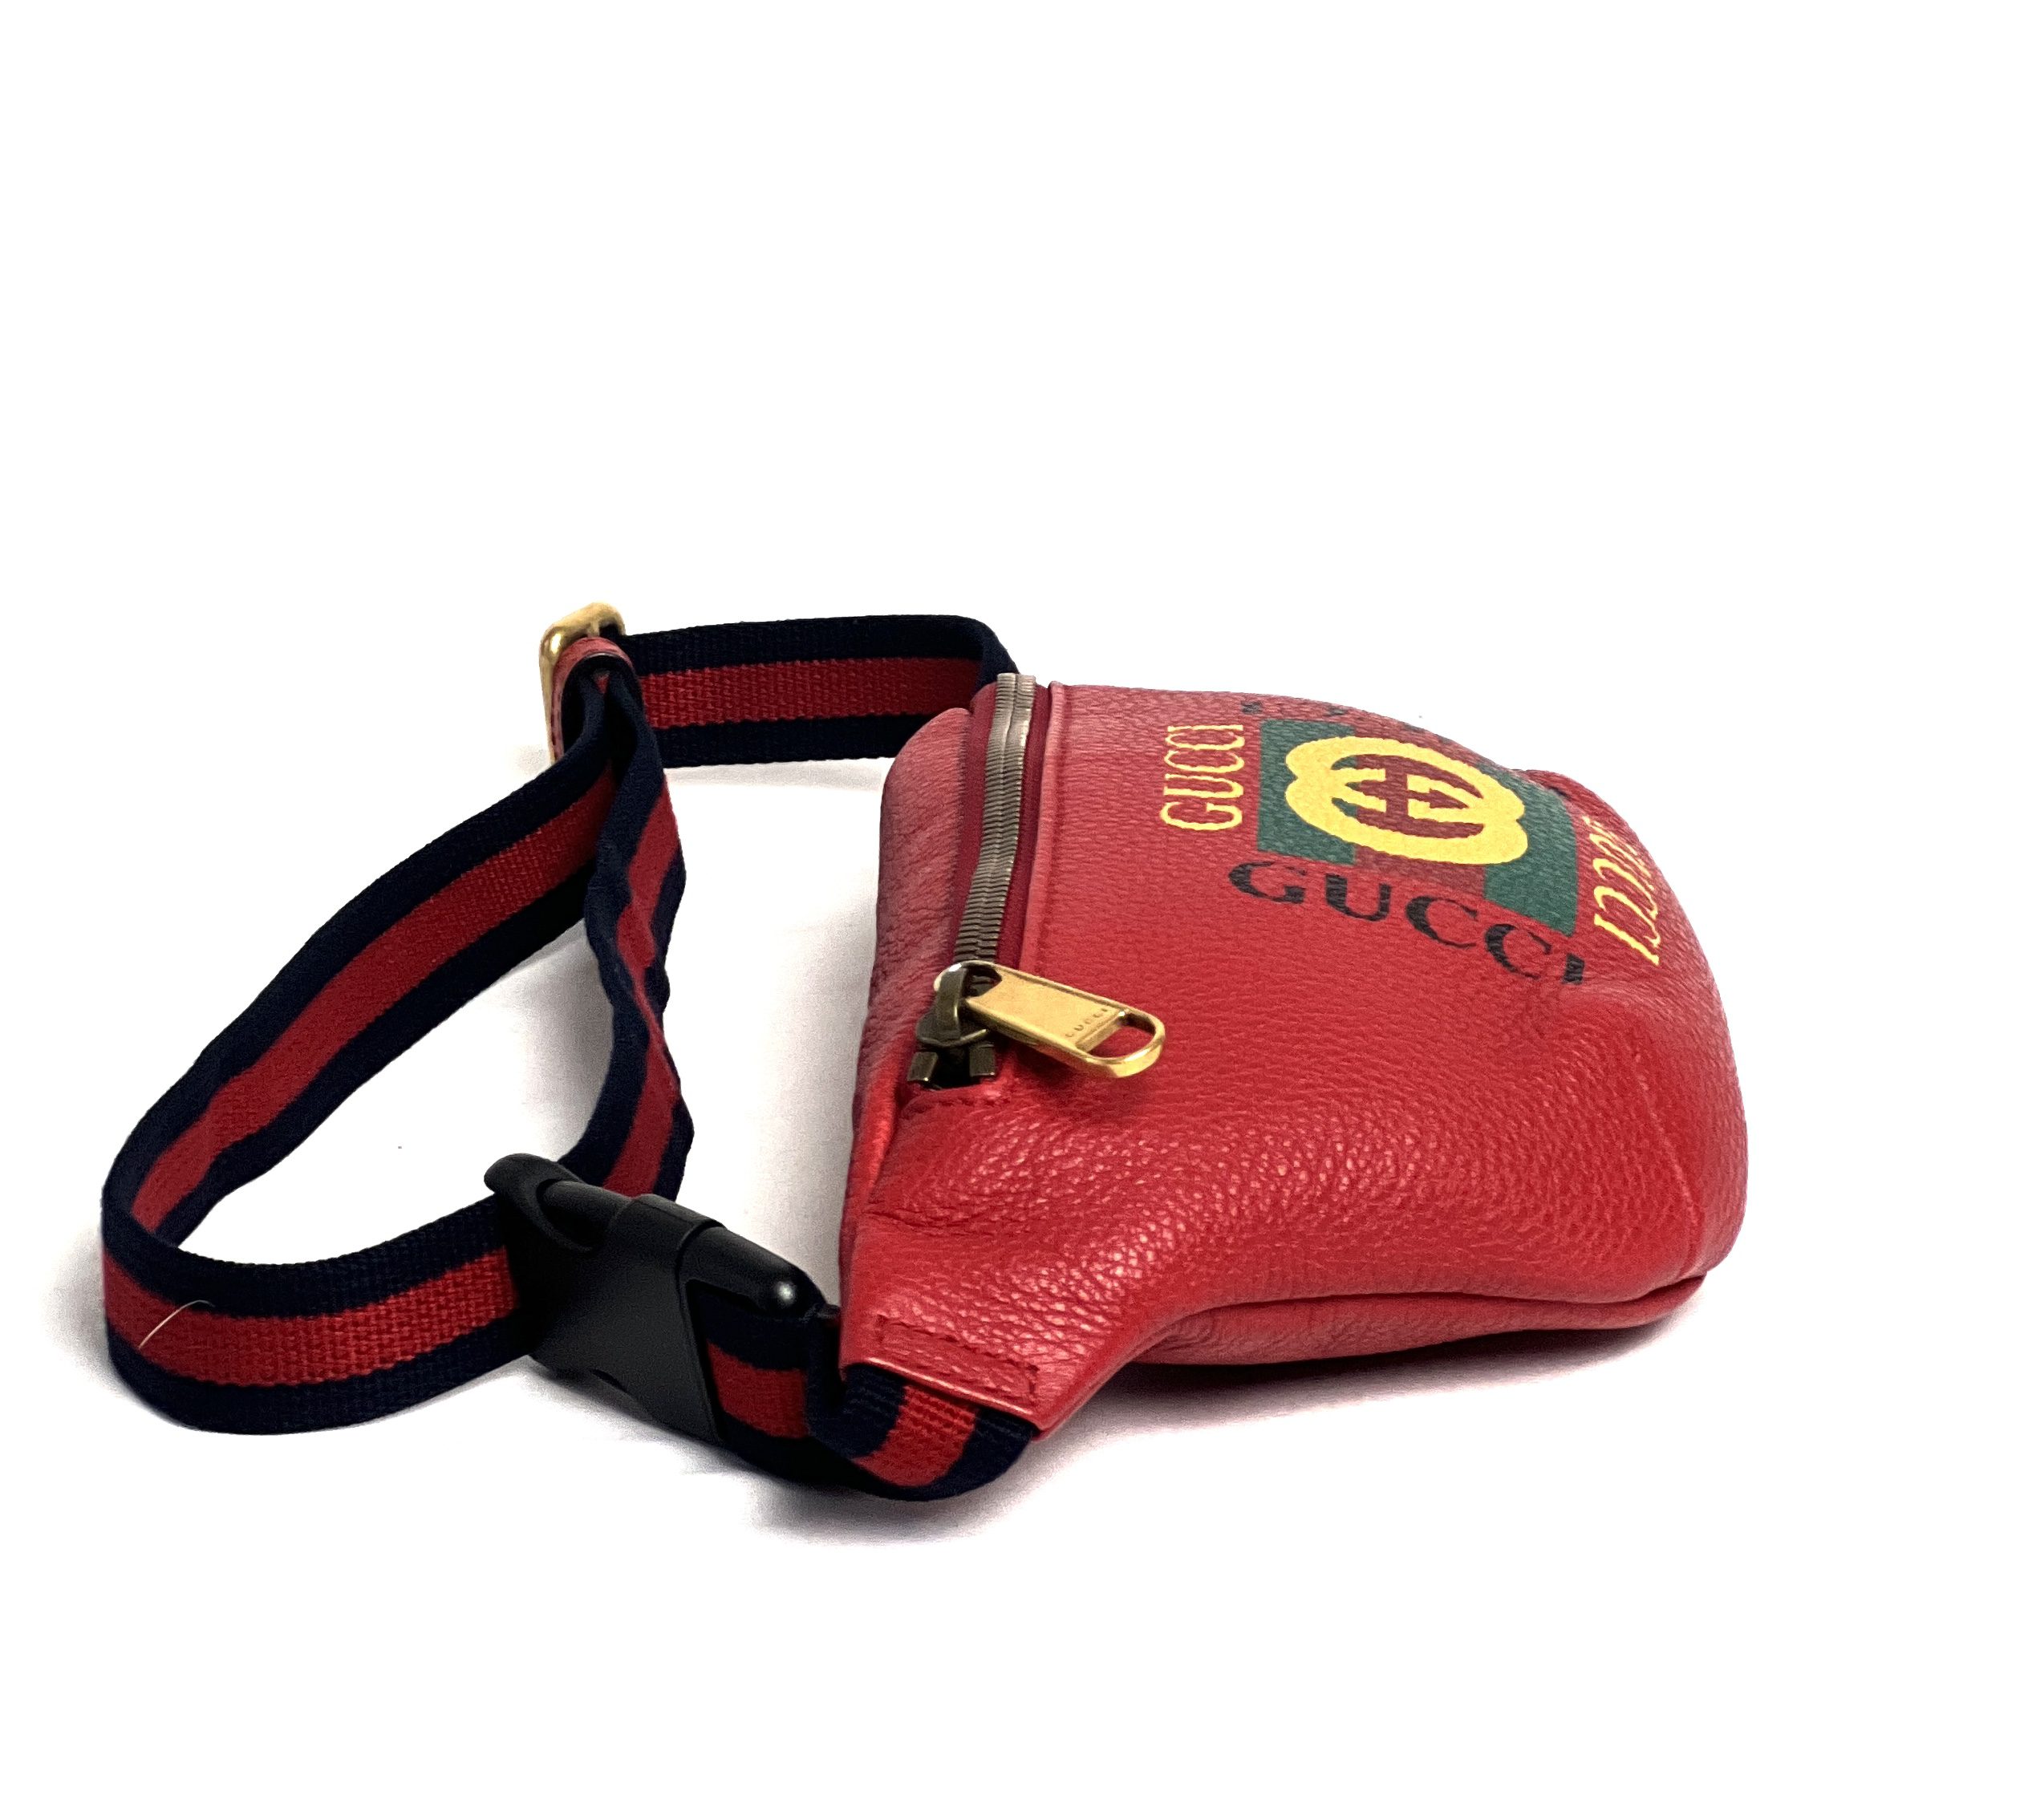 Gucci Print Leather Belt Bag in Red